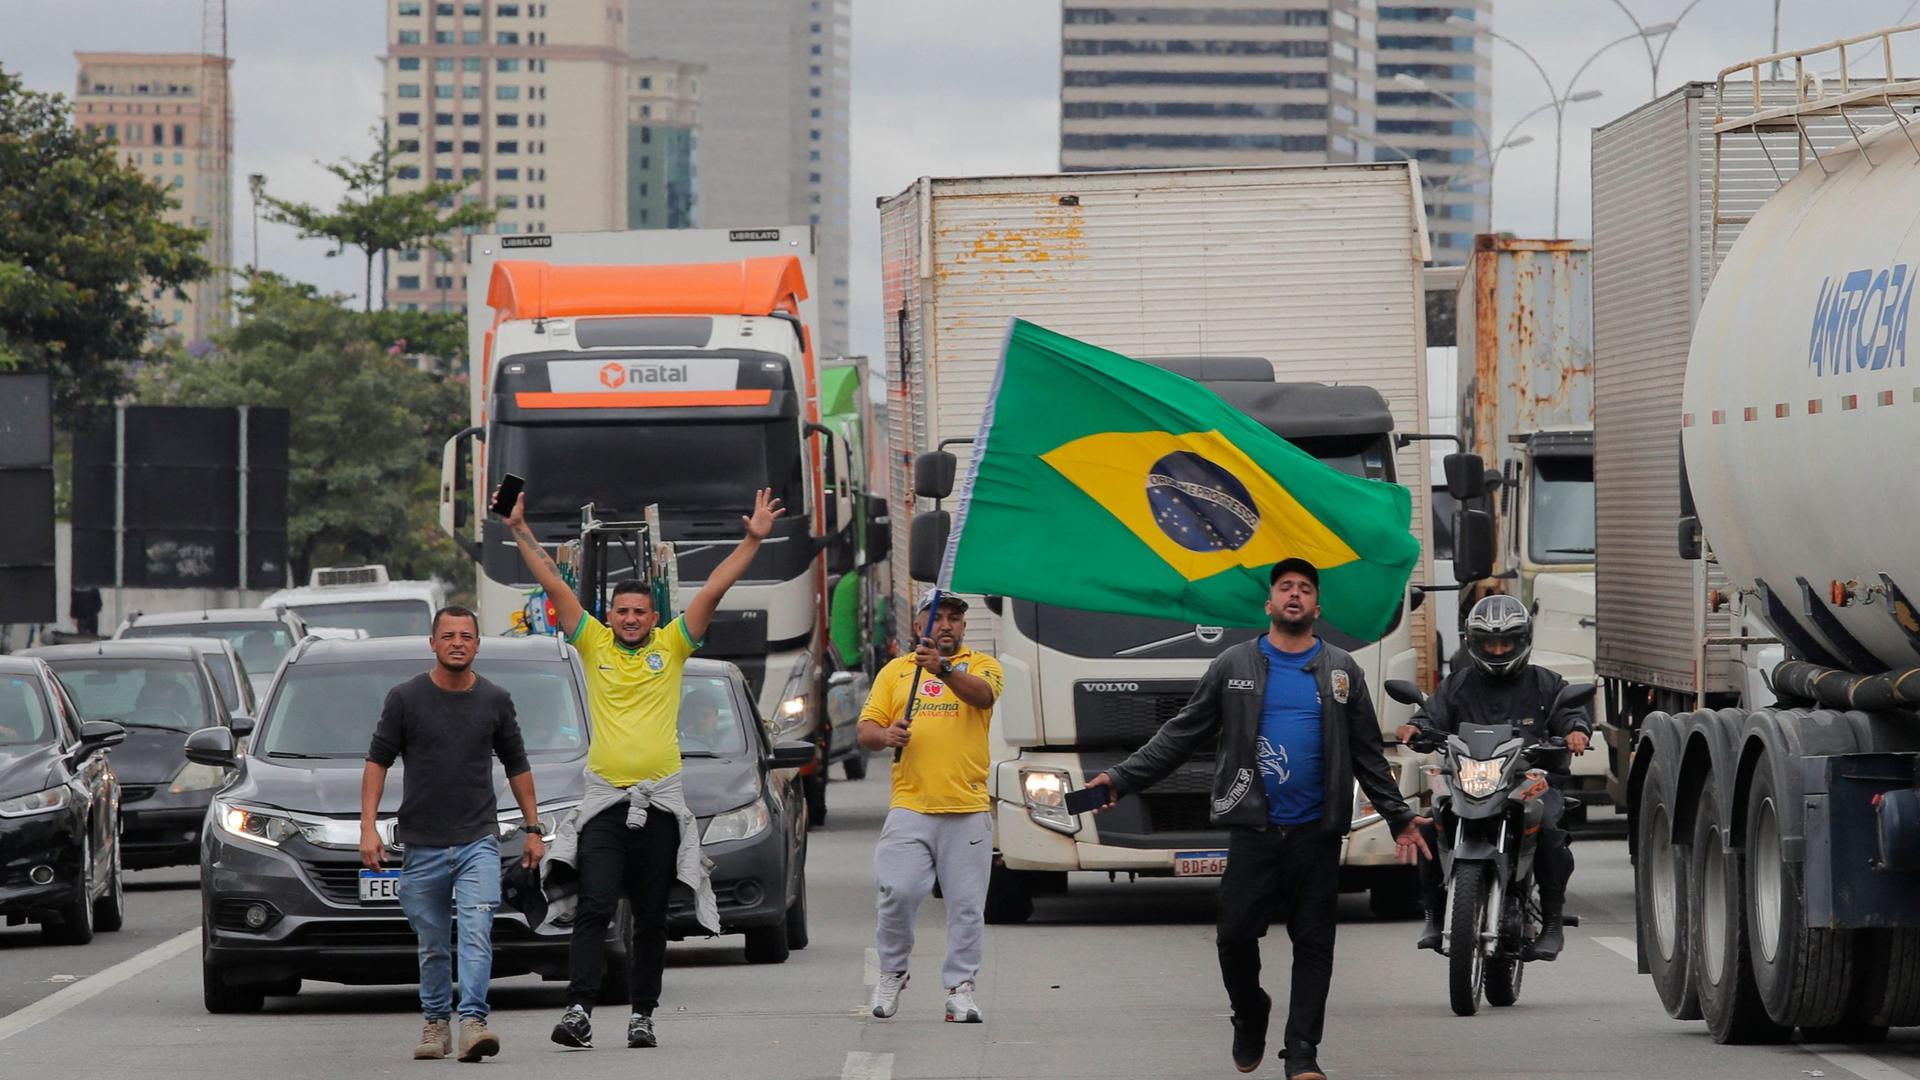 Supporters of President Jair Bolsonaro block Castelo Branco highway, on the outskirts of Sao Paulo, Brazil, on November 1, 2022. - Supporters of Brazilian President Jair Bolsonaro blocked major highways for a second day as tensions mounted over his silence after narrowly losing re-election to bitter rival Luiz Inacio Lula da Silva. Federal Highway Police (PRF) on Tuesday reported more than 250 total or partial road blockages in at least 23 states by Bolsonaro supporters, while local media said protests outside the country's main international airport in Sao Paulo delayed passengers and led to several flights being cancelled. (Photo by Caio GUATELLI / AFP)